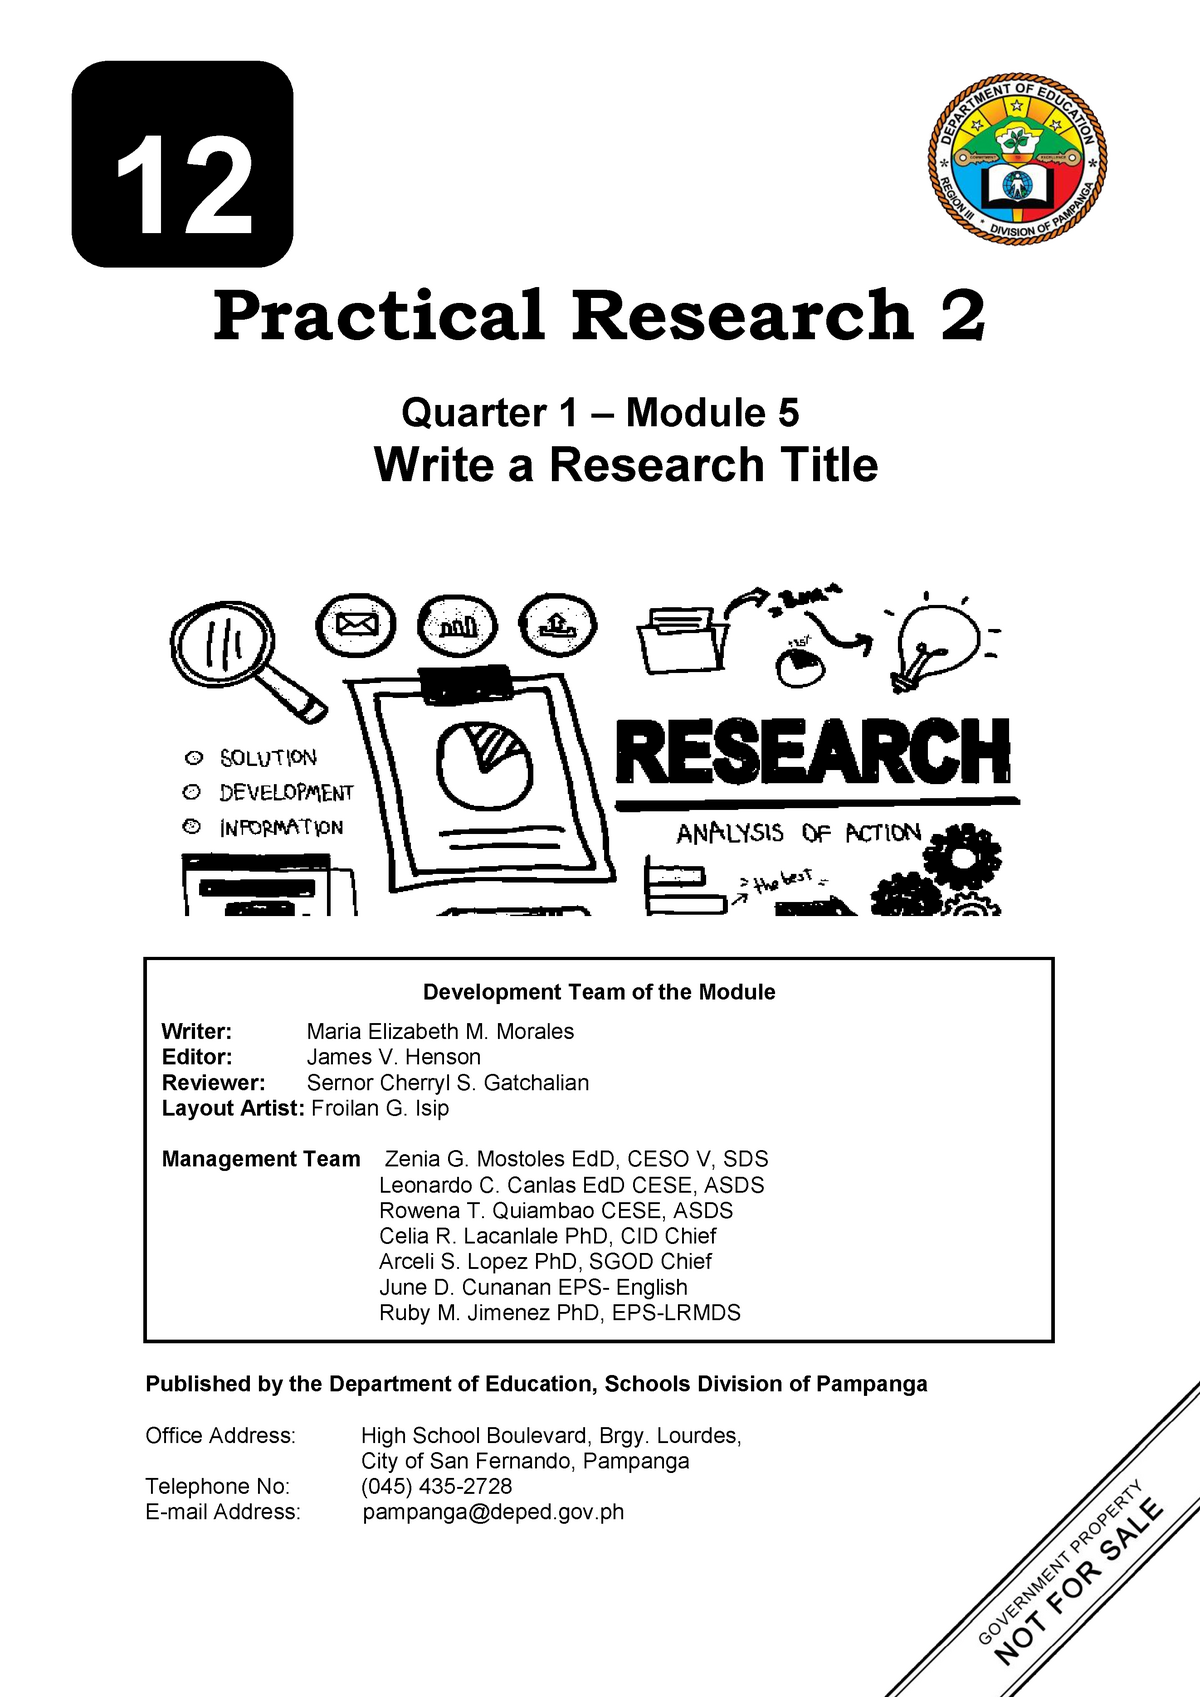 writing a research title module